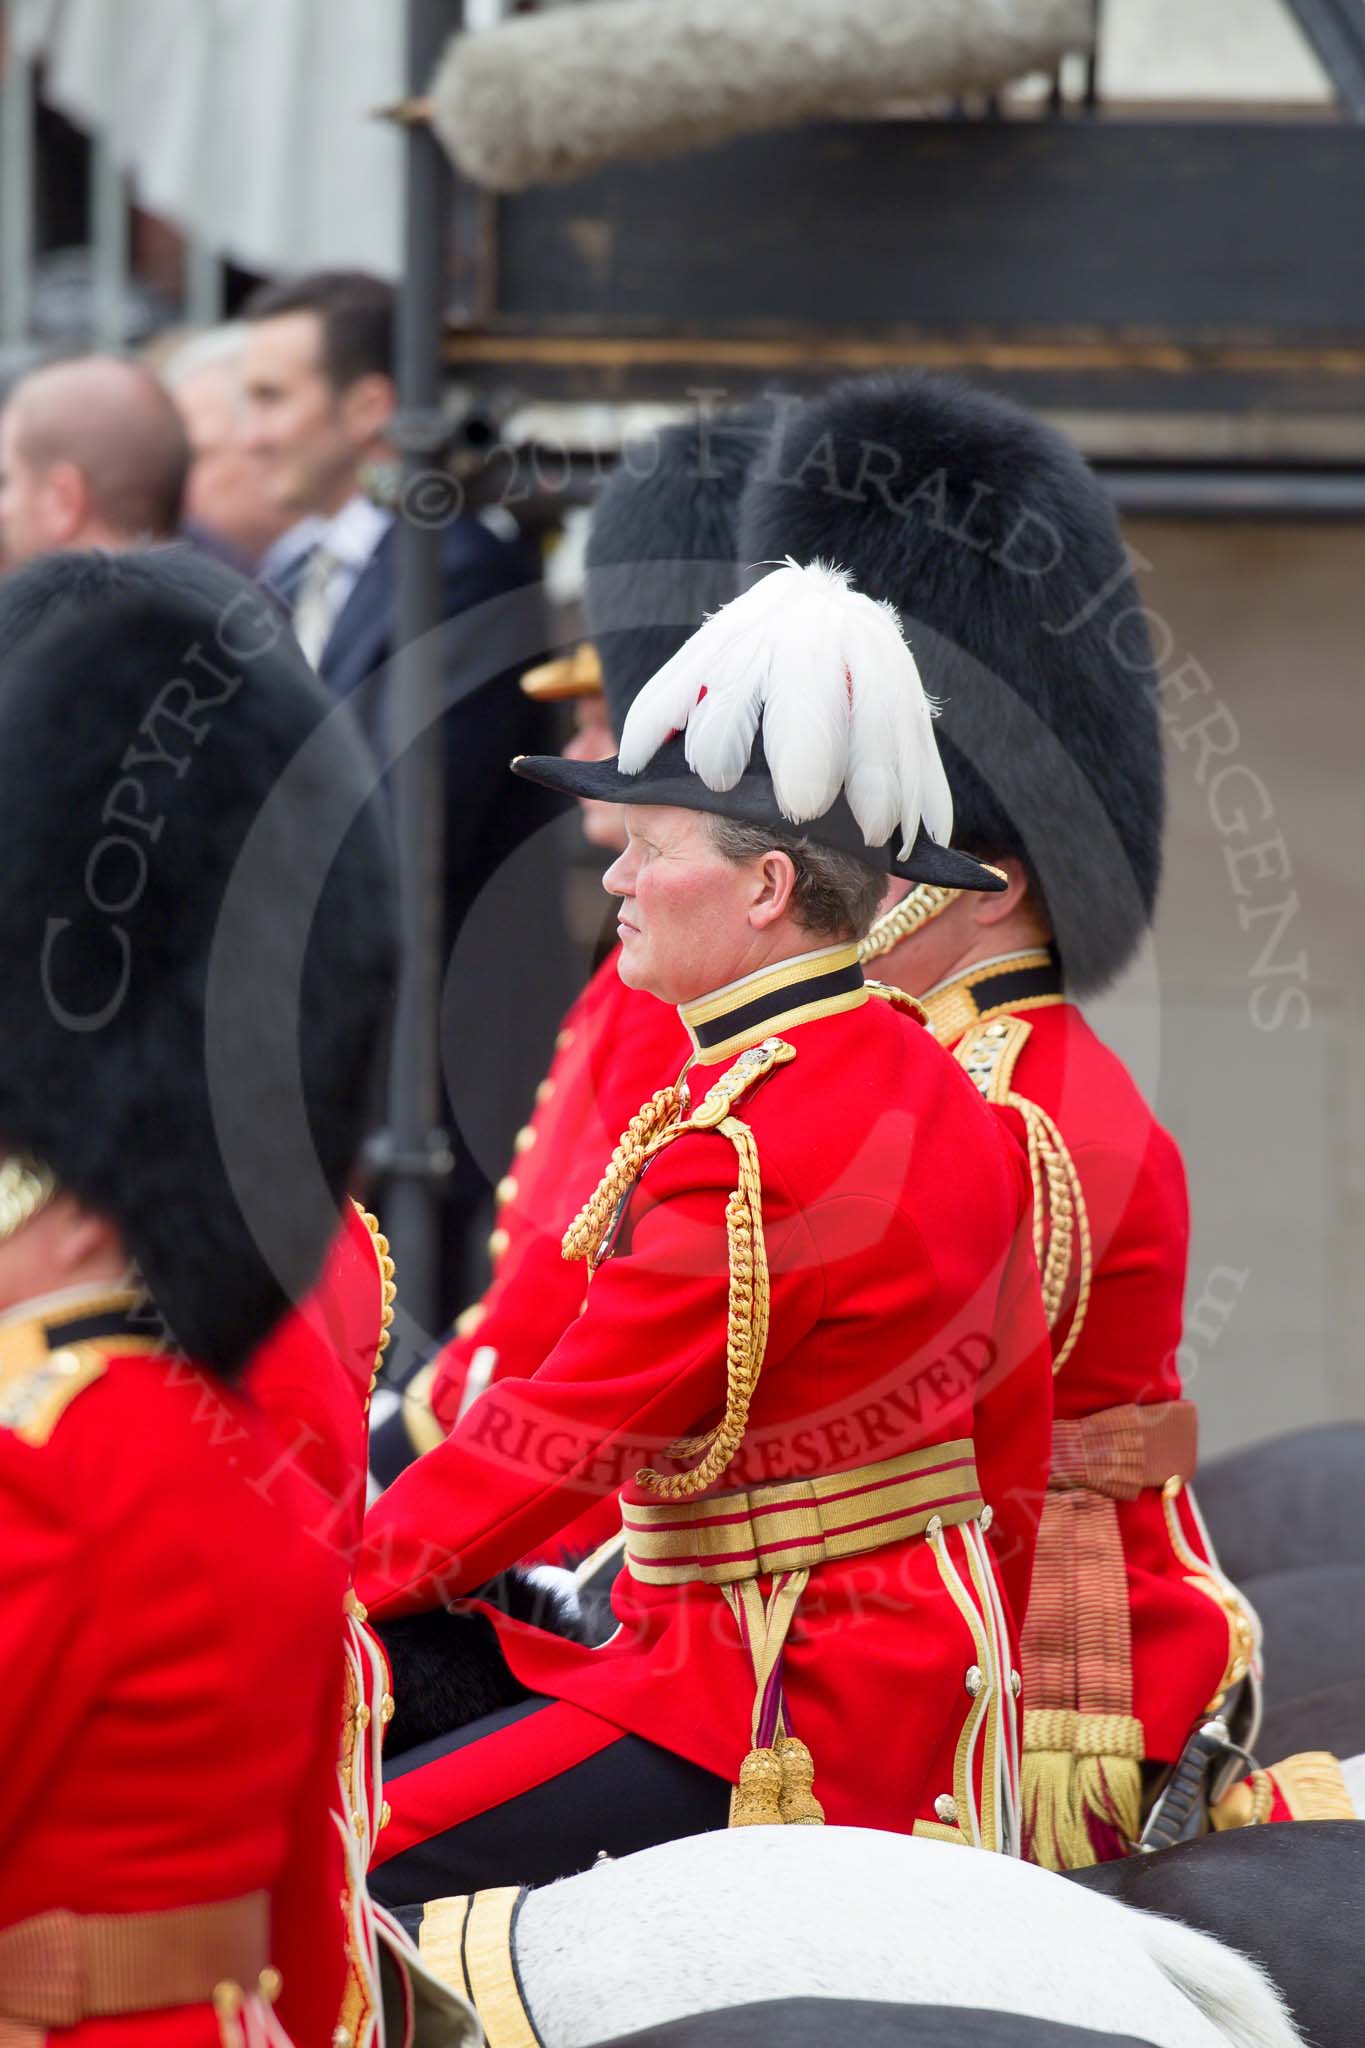 Trooping the Colour 2010: The Chief of Staff London District, Colonel A D Mathewson, watching the &quot;Massed Bands Troop&quot;. The structure behind him is a press stand used by photographers and television, hence the &quot;furry&quot; microphone on top of the photo..
Horse Guards Parade, Westminster,
London SW1,
Greater London,
United Kingdom,
on 12 June 2010 at 11:15, image #118